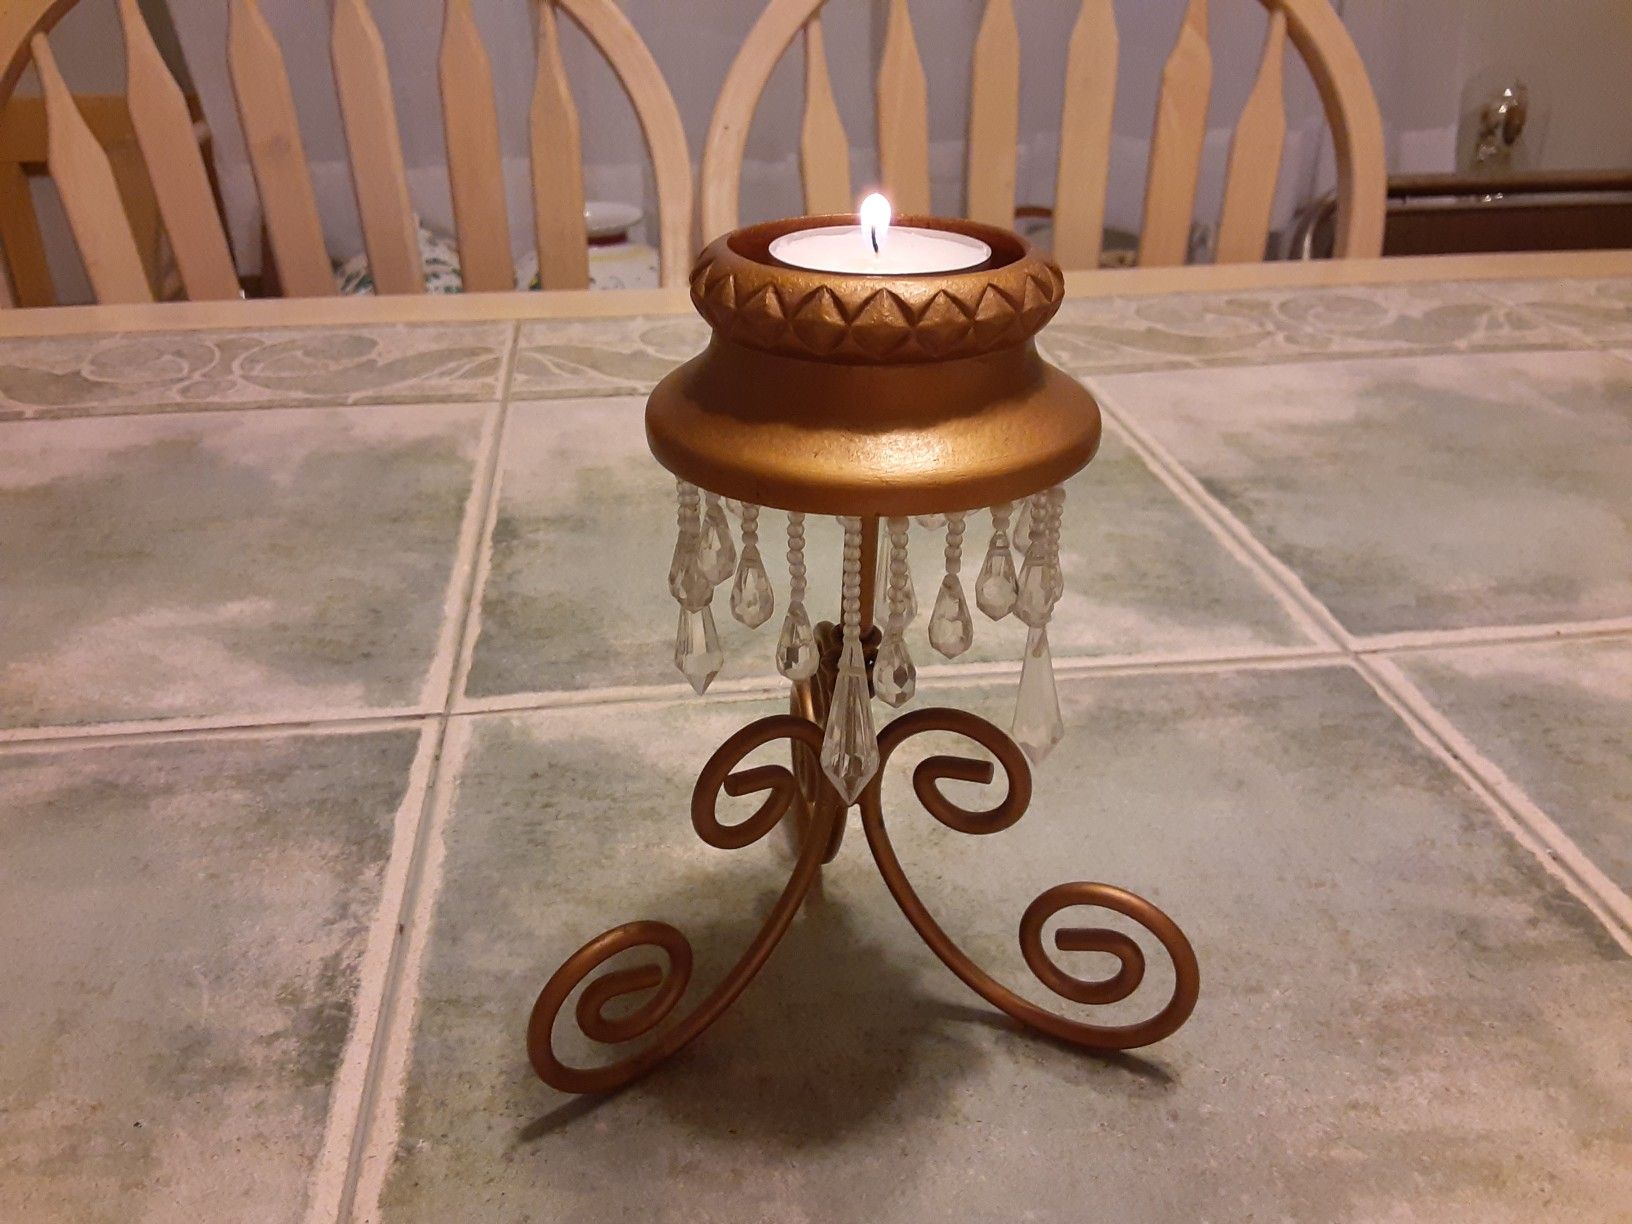 THIS is a Nice Looking CANDLE HOLDER